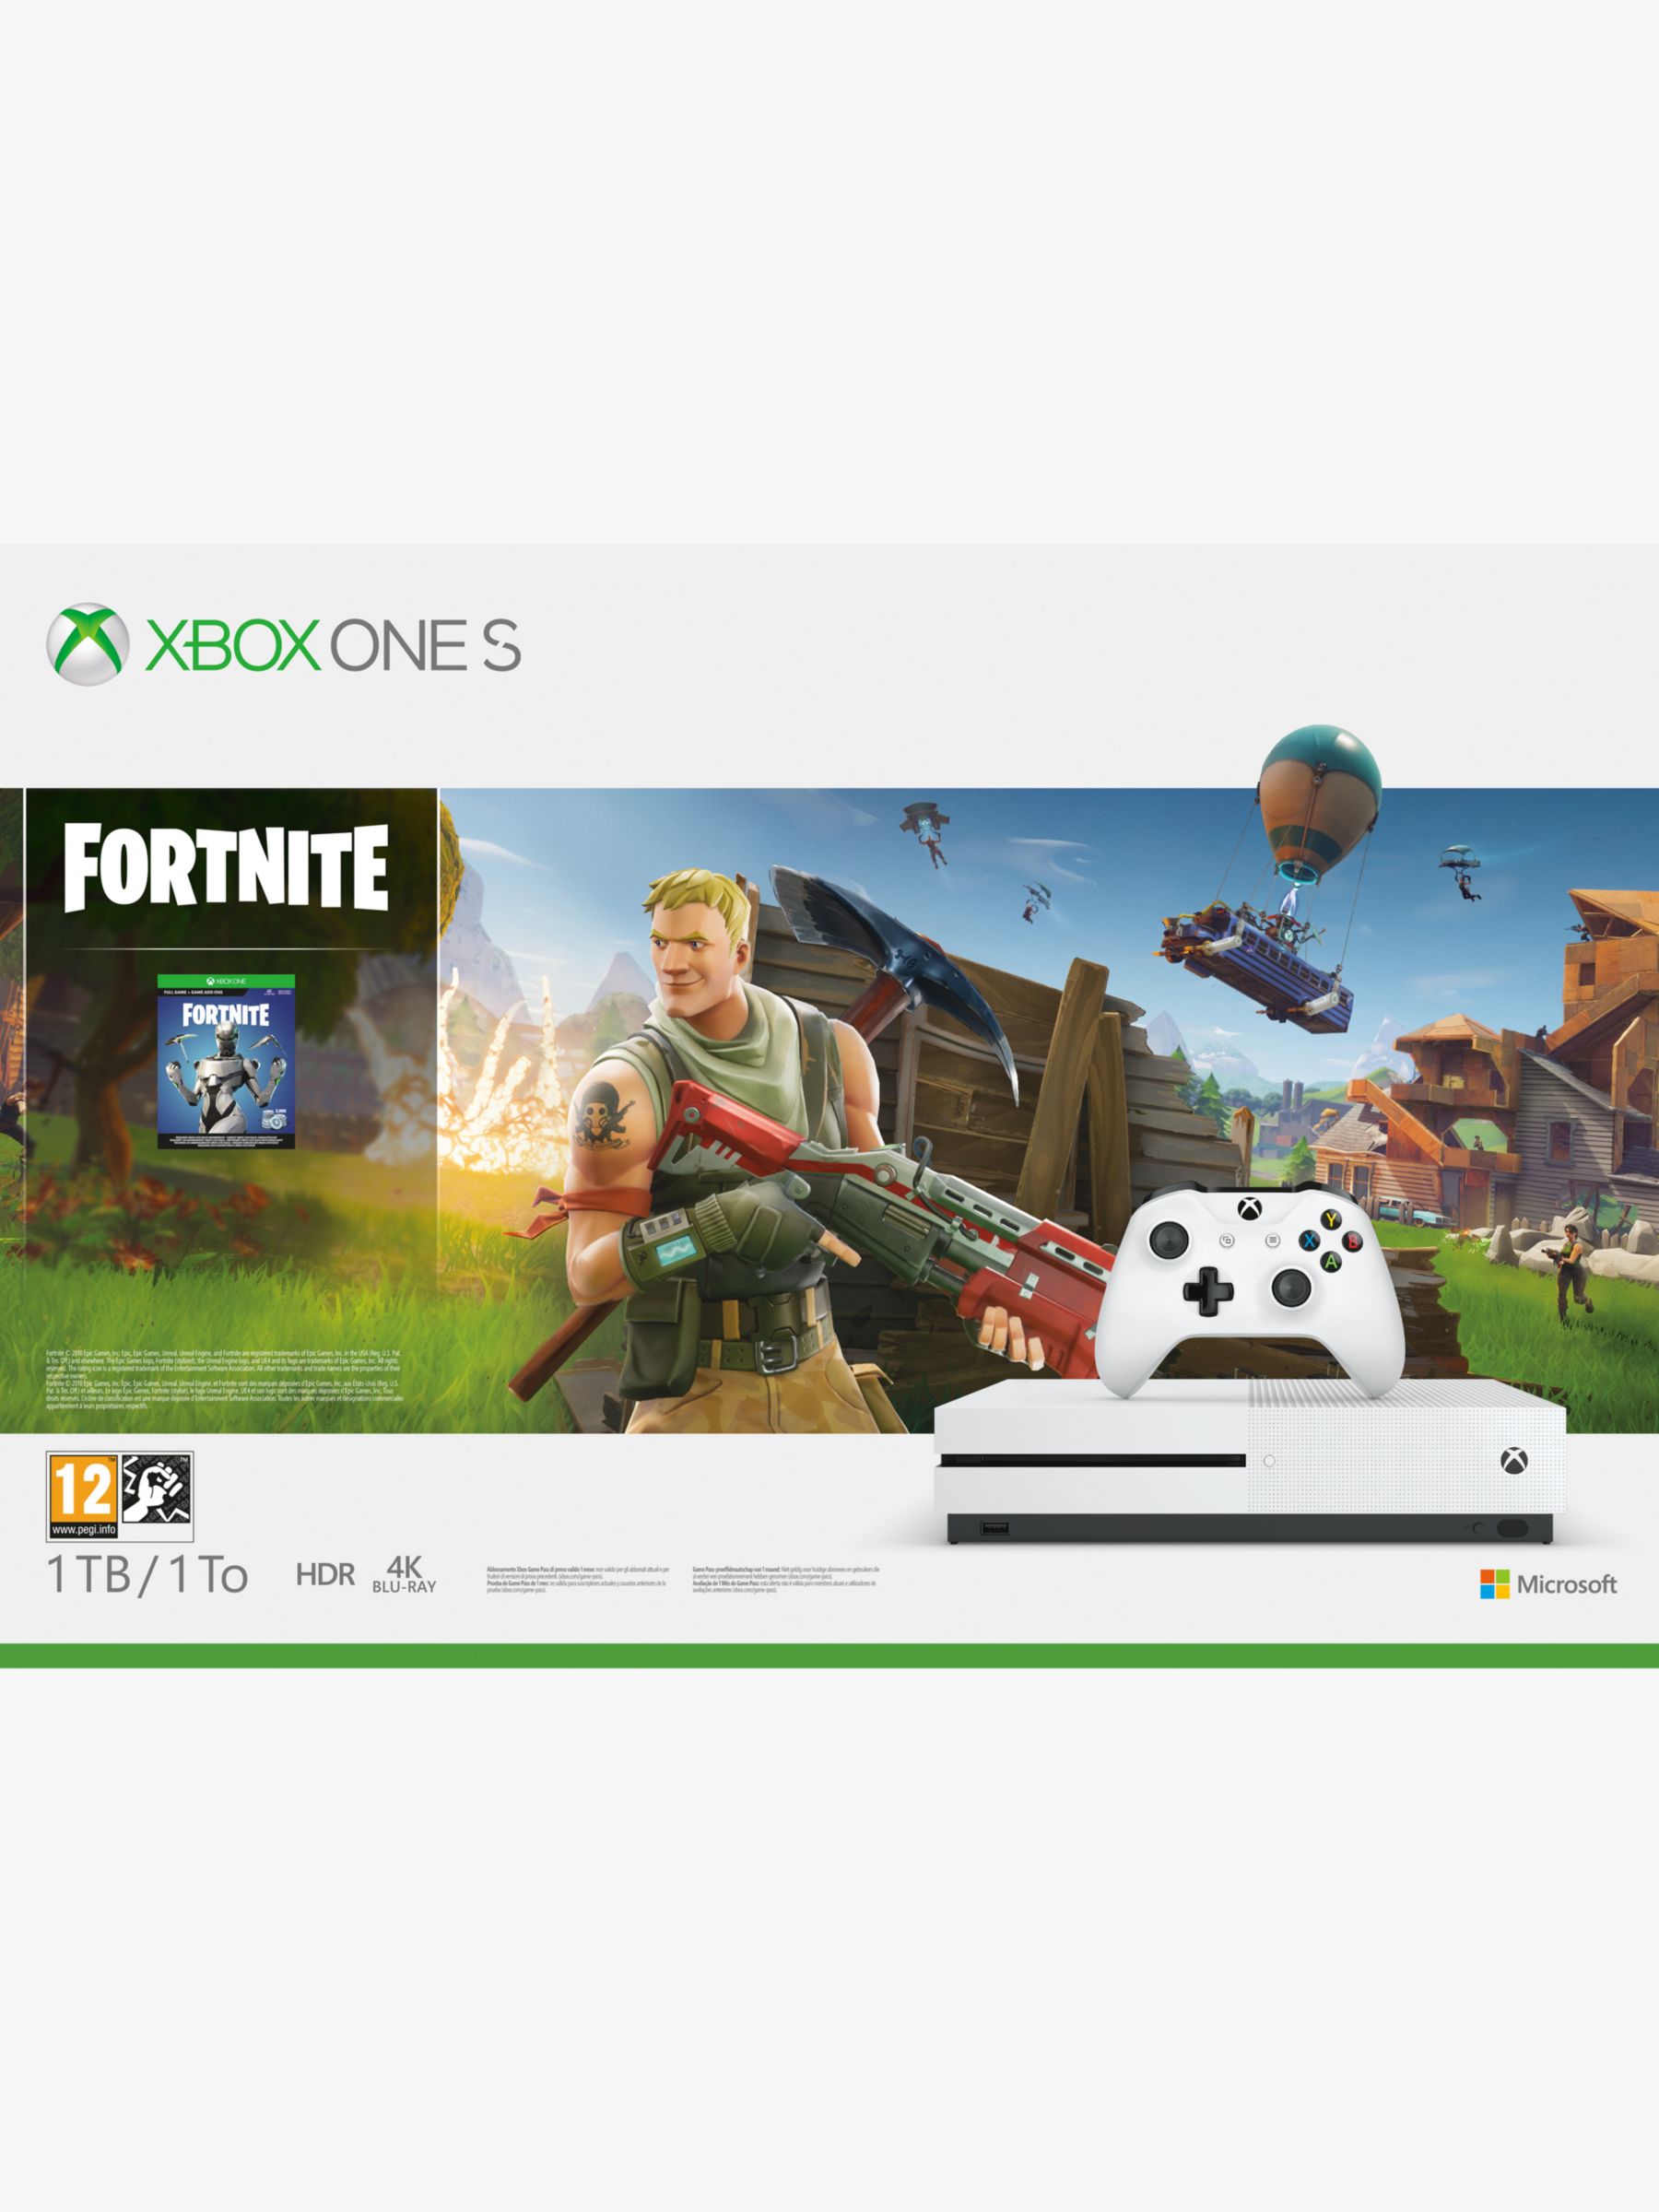 buy microsoft xbox one s console 1tb with wireless controller and fortnite game bundle - fortnite on microsoft